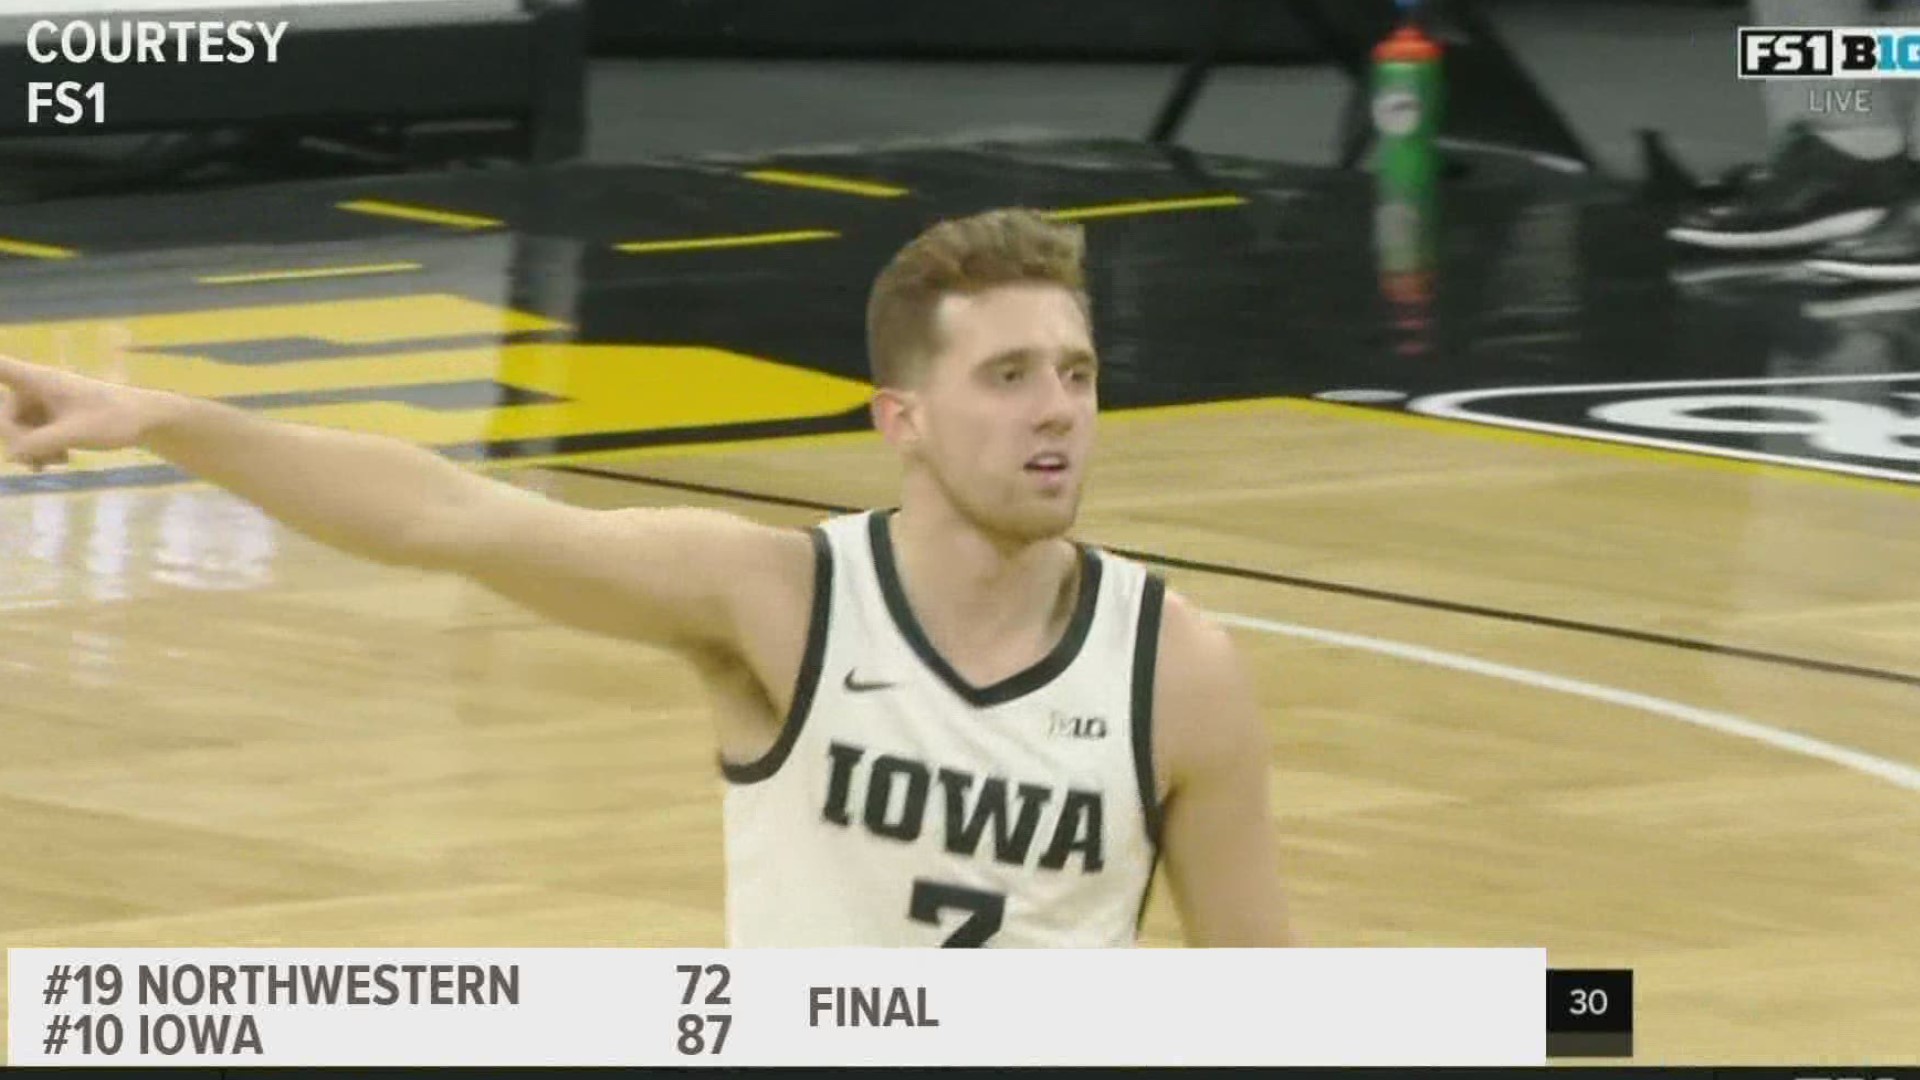 The Hawkeyes won their eighth consecutive home game against a ranked opponent.